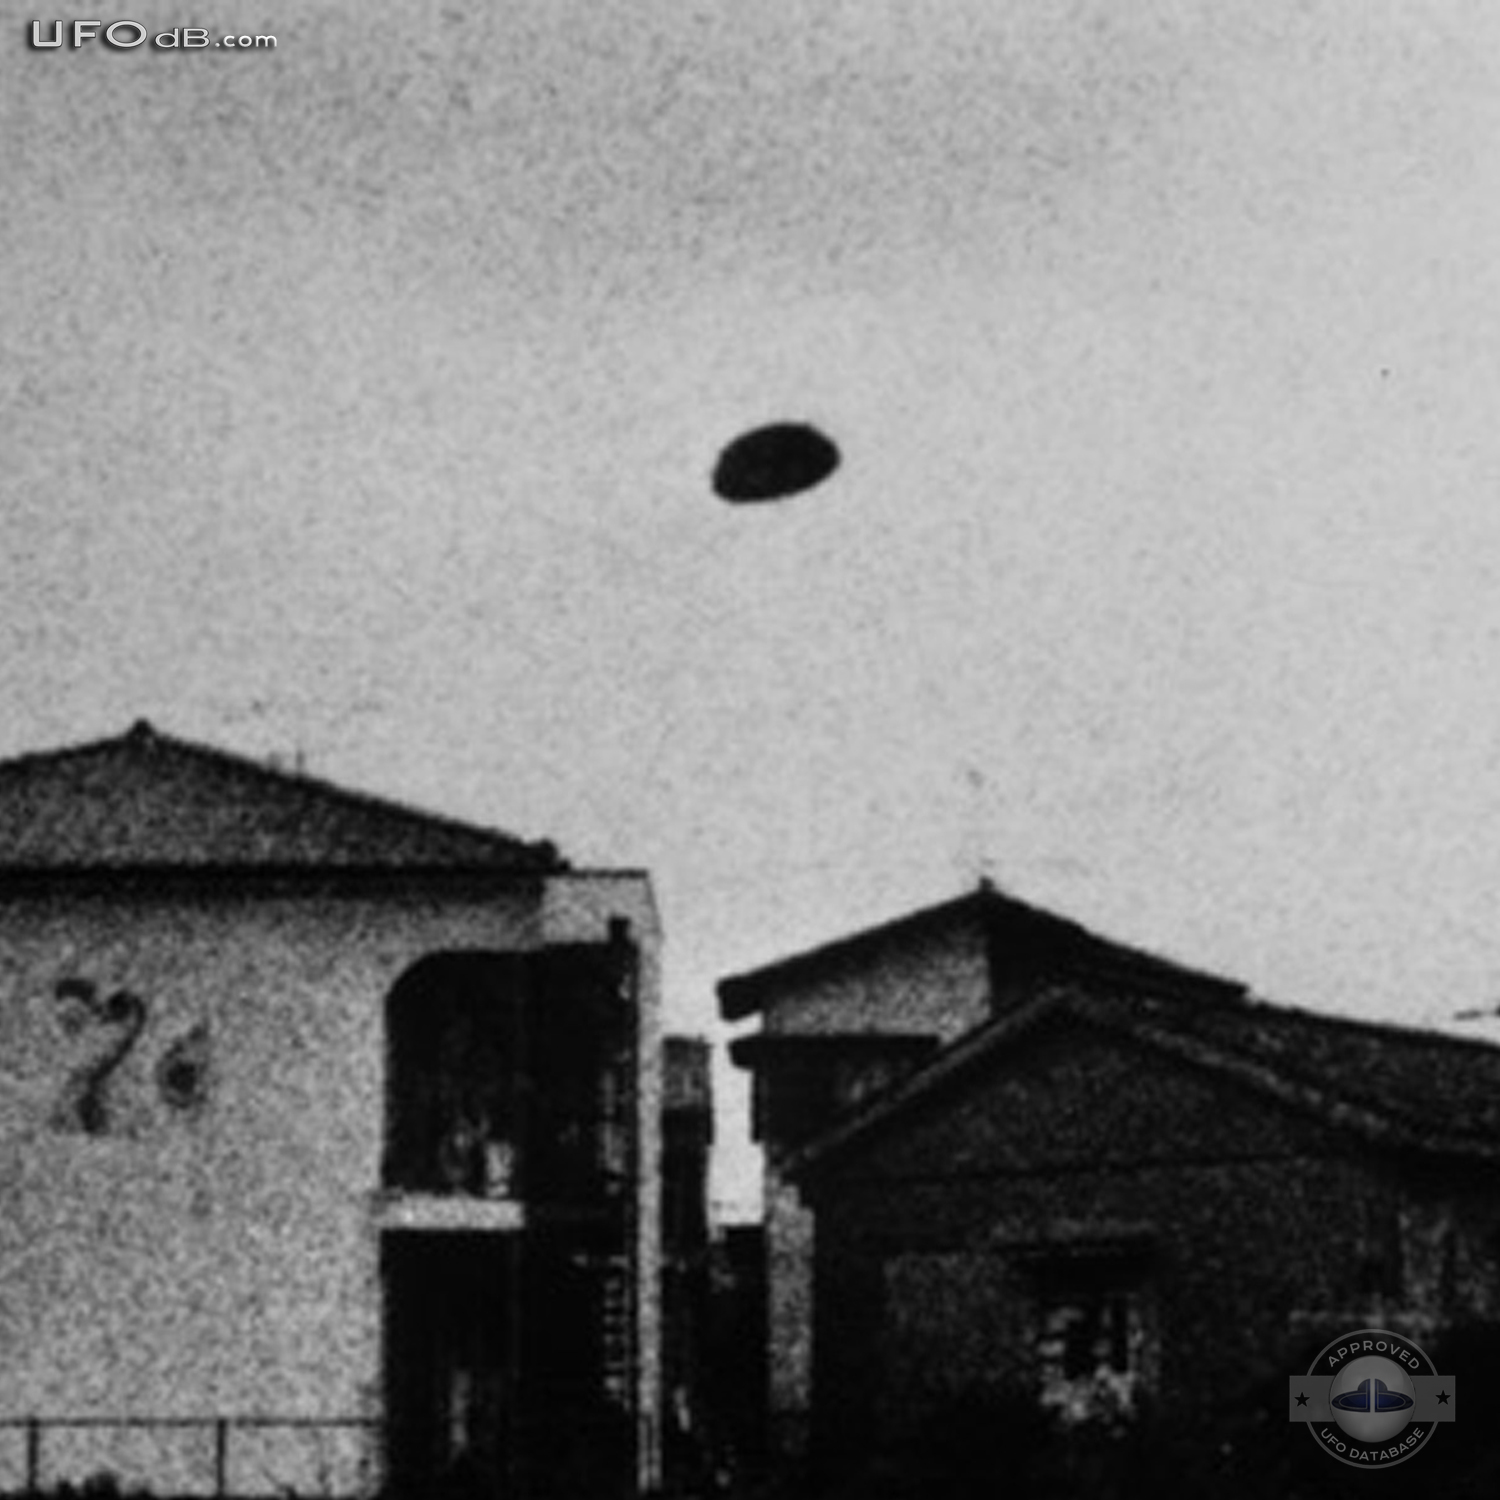 Japan University student shoot picture of UFO passing over his house UFO Picture #353-2